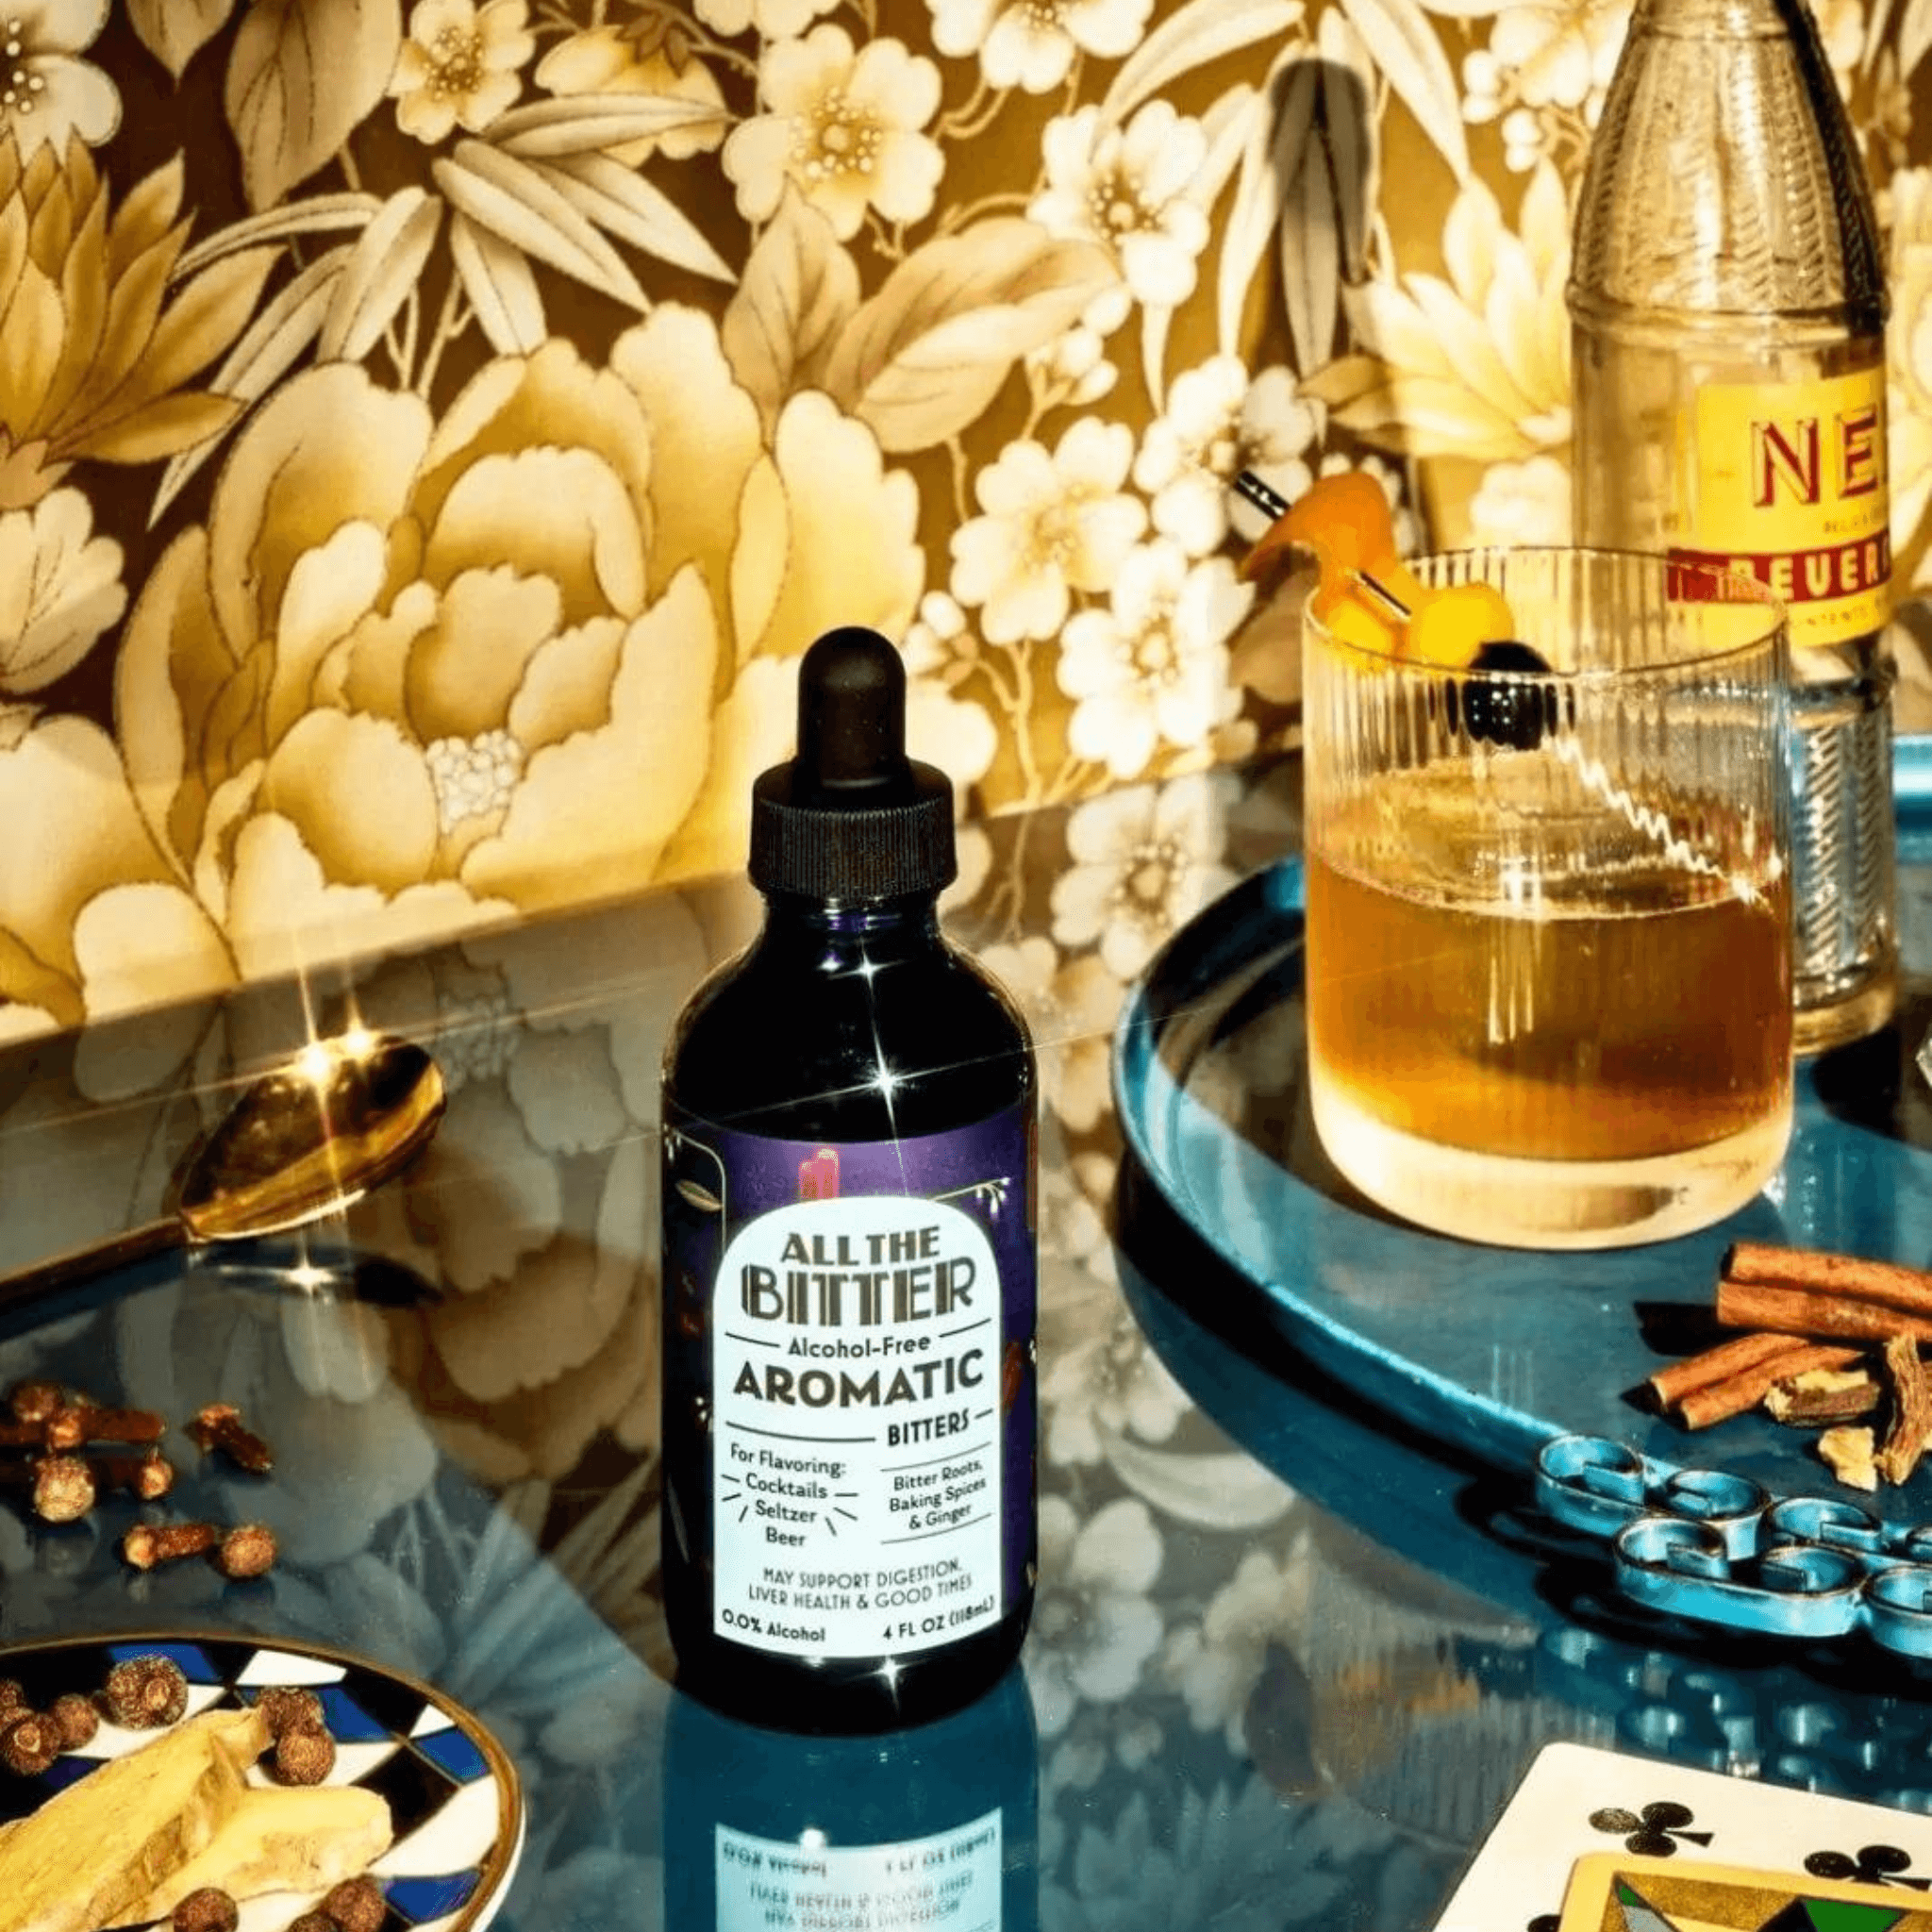 All the Bitter Aromatic Bitters for Wine & Cocktails (Alcohol-Free)